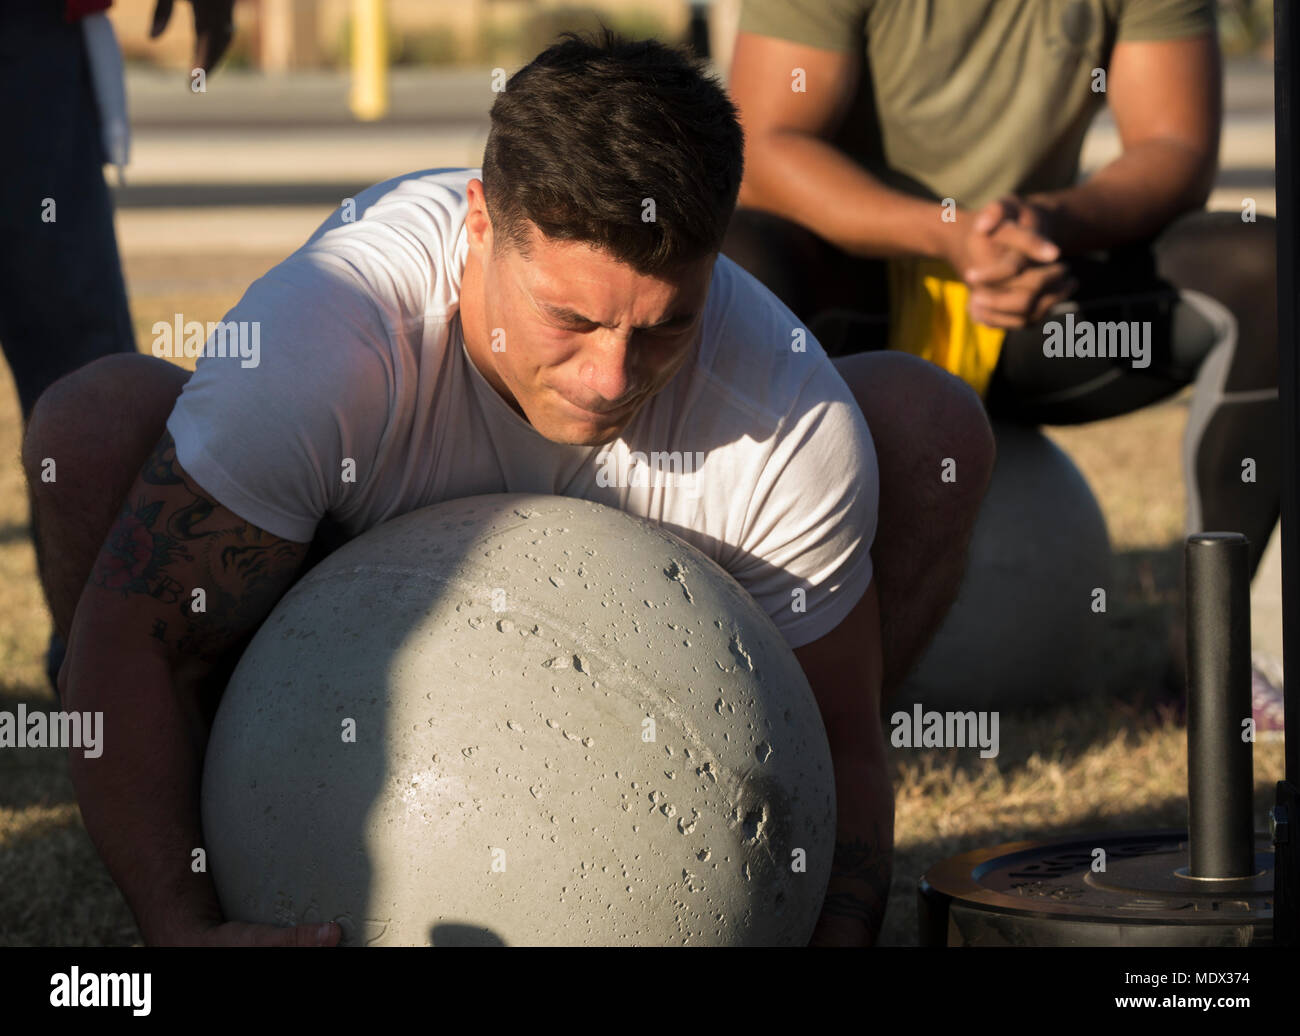 U.S. Marine Corps Cpl. Noah Diaz, an Aviation Ordnance Technician assigned to Marine Aviation Logistics Squadron 13, stationed at Marine Corps Air Station (MCAS) Yuma, Ariz., lifts an Atlas Stone to practice for the Strongman Competition Dec. 15, 2017 on the station parade deck. Atlas Stones are large balls of concrete used to test strength. The practice is to prepare for the Bull of the Desert Strongman Competition slated Feb. 17, 2018 in Yuma, Ariz. (U.S. Marine Corps photo by Lance Cpl. Sabrina Candiaflores) Stock Photo